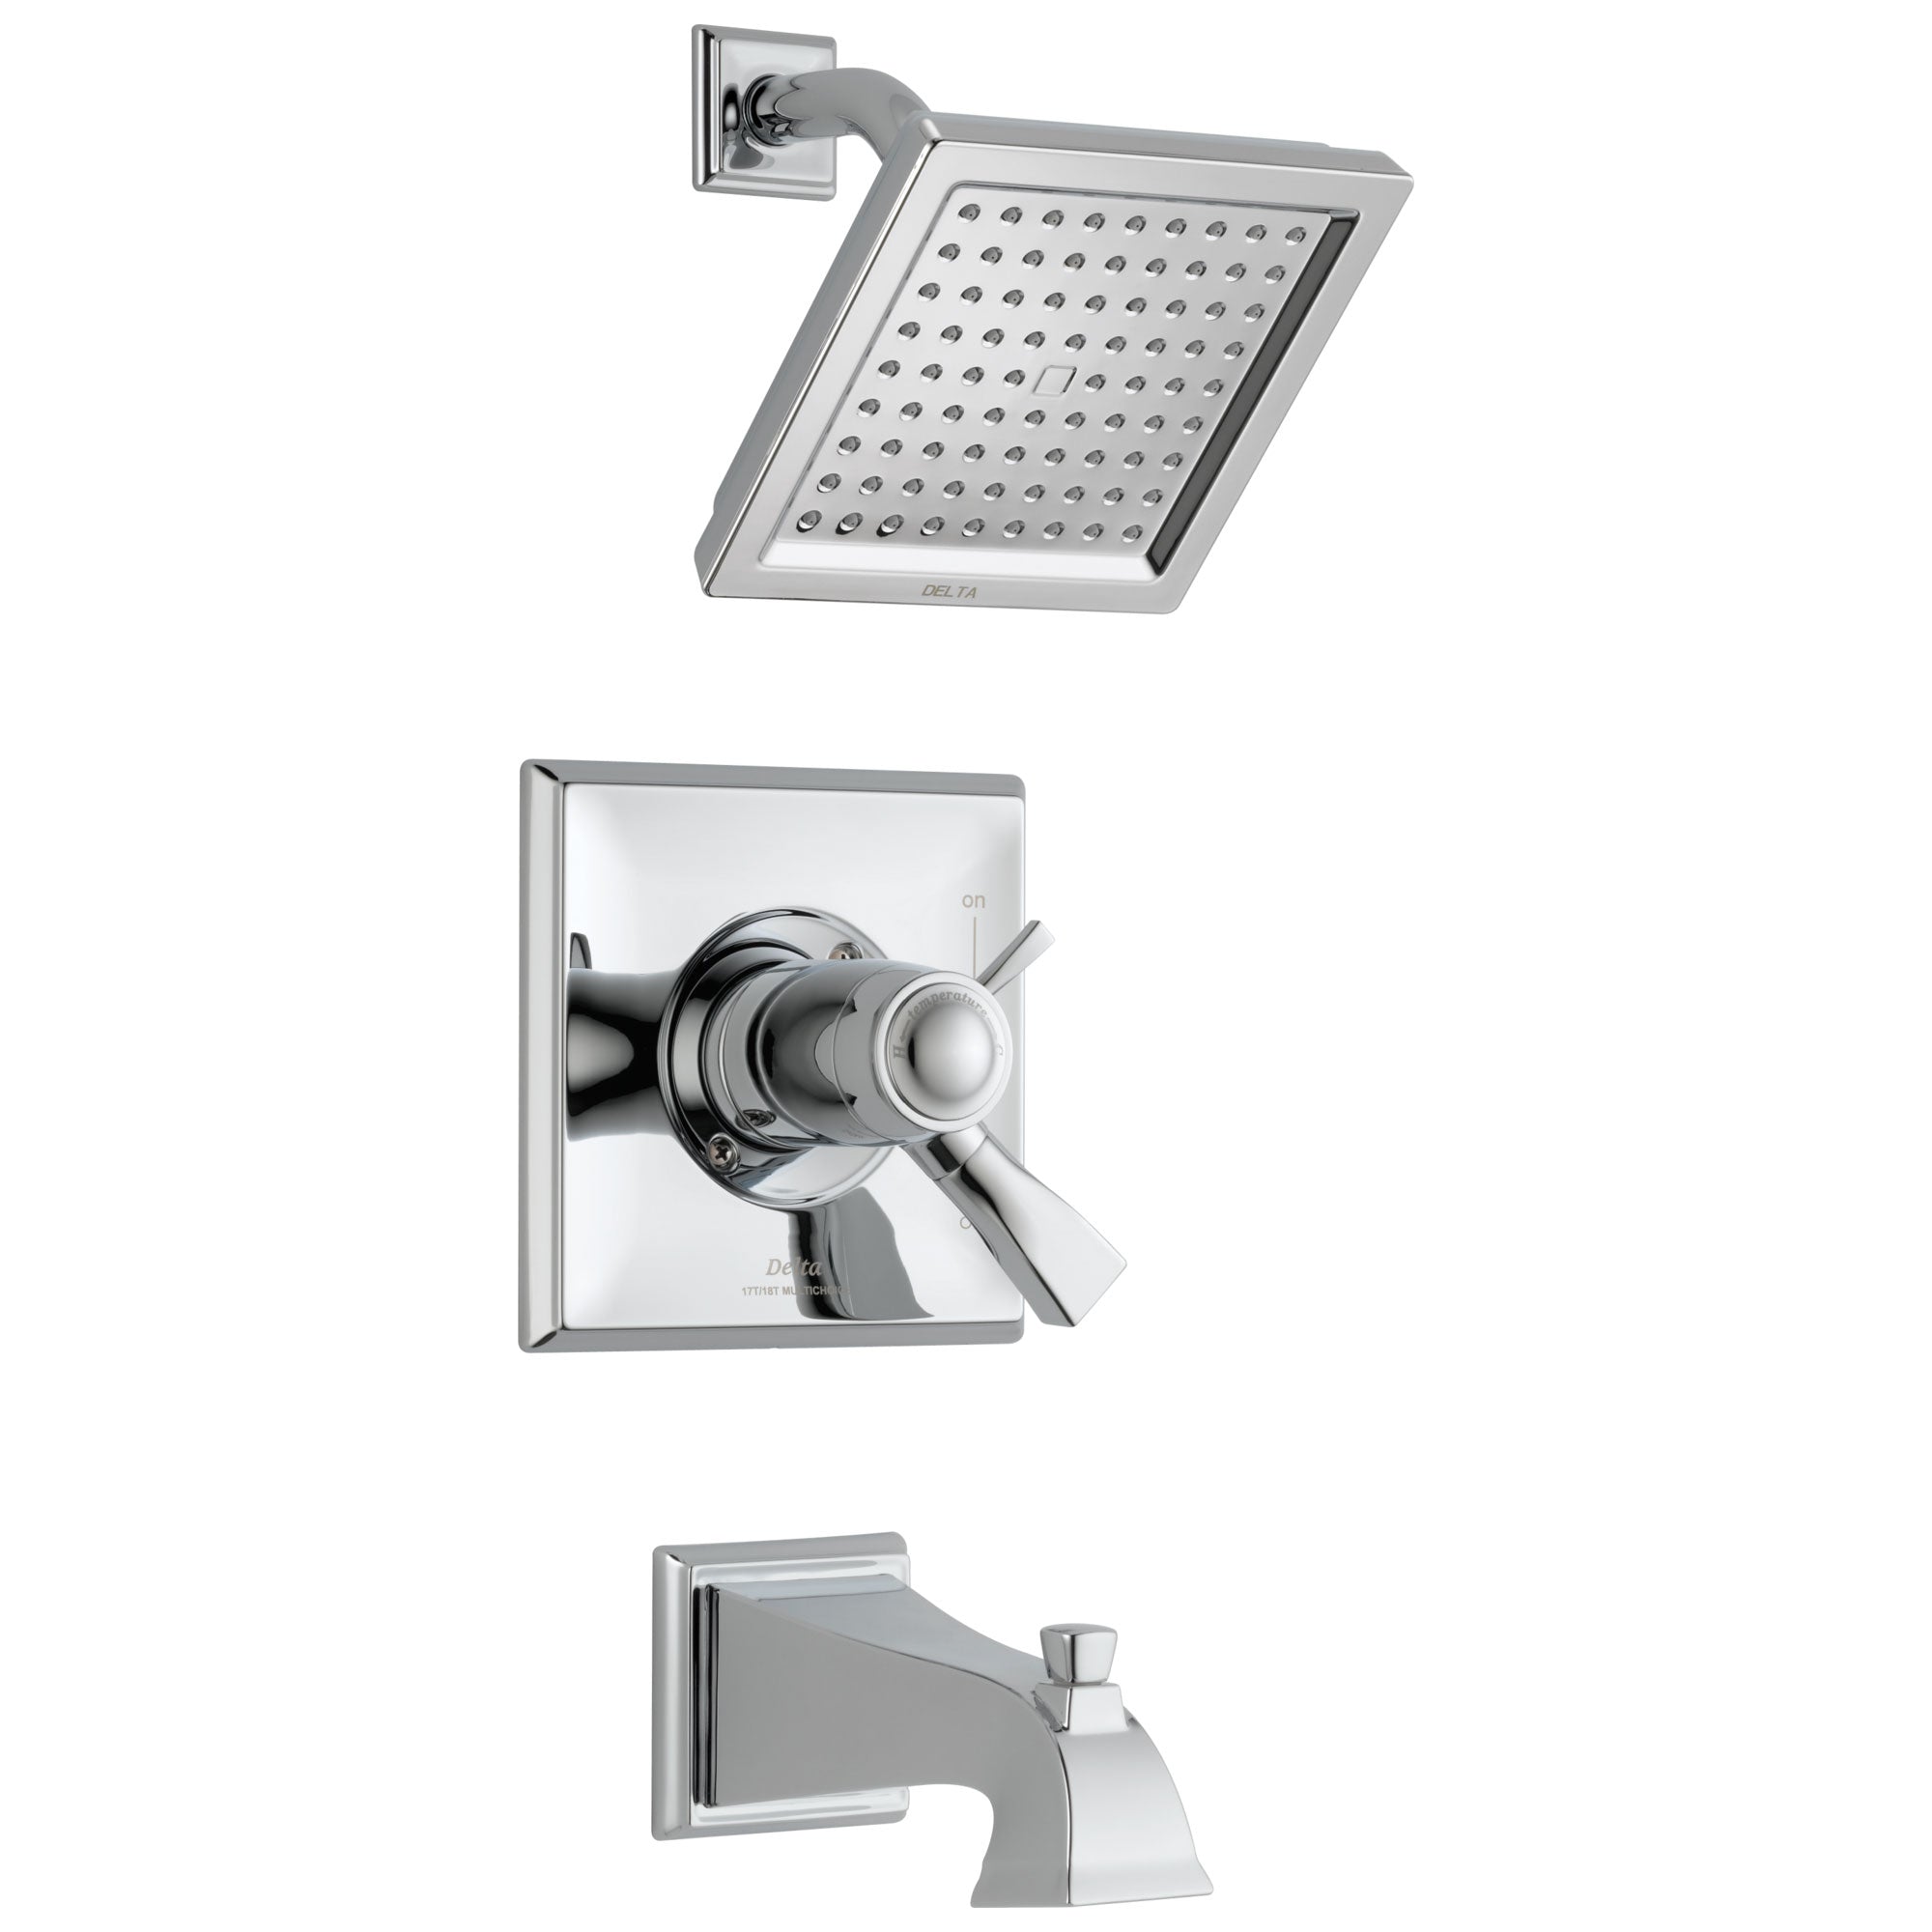 Delta Dryden Chrome Finish Thermostatic Water Efficient Tub & Shower Faucet Combination Includes Handles, Cartridge, and Valve without Stops D3243V